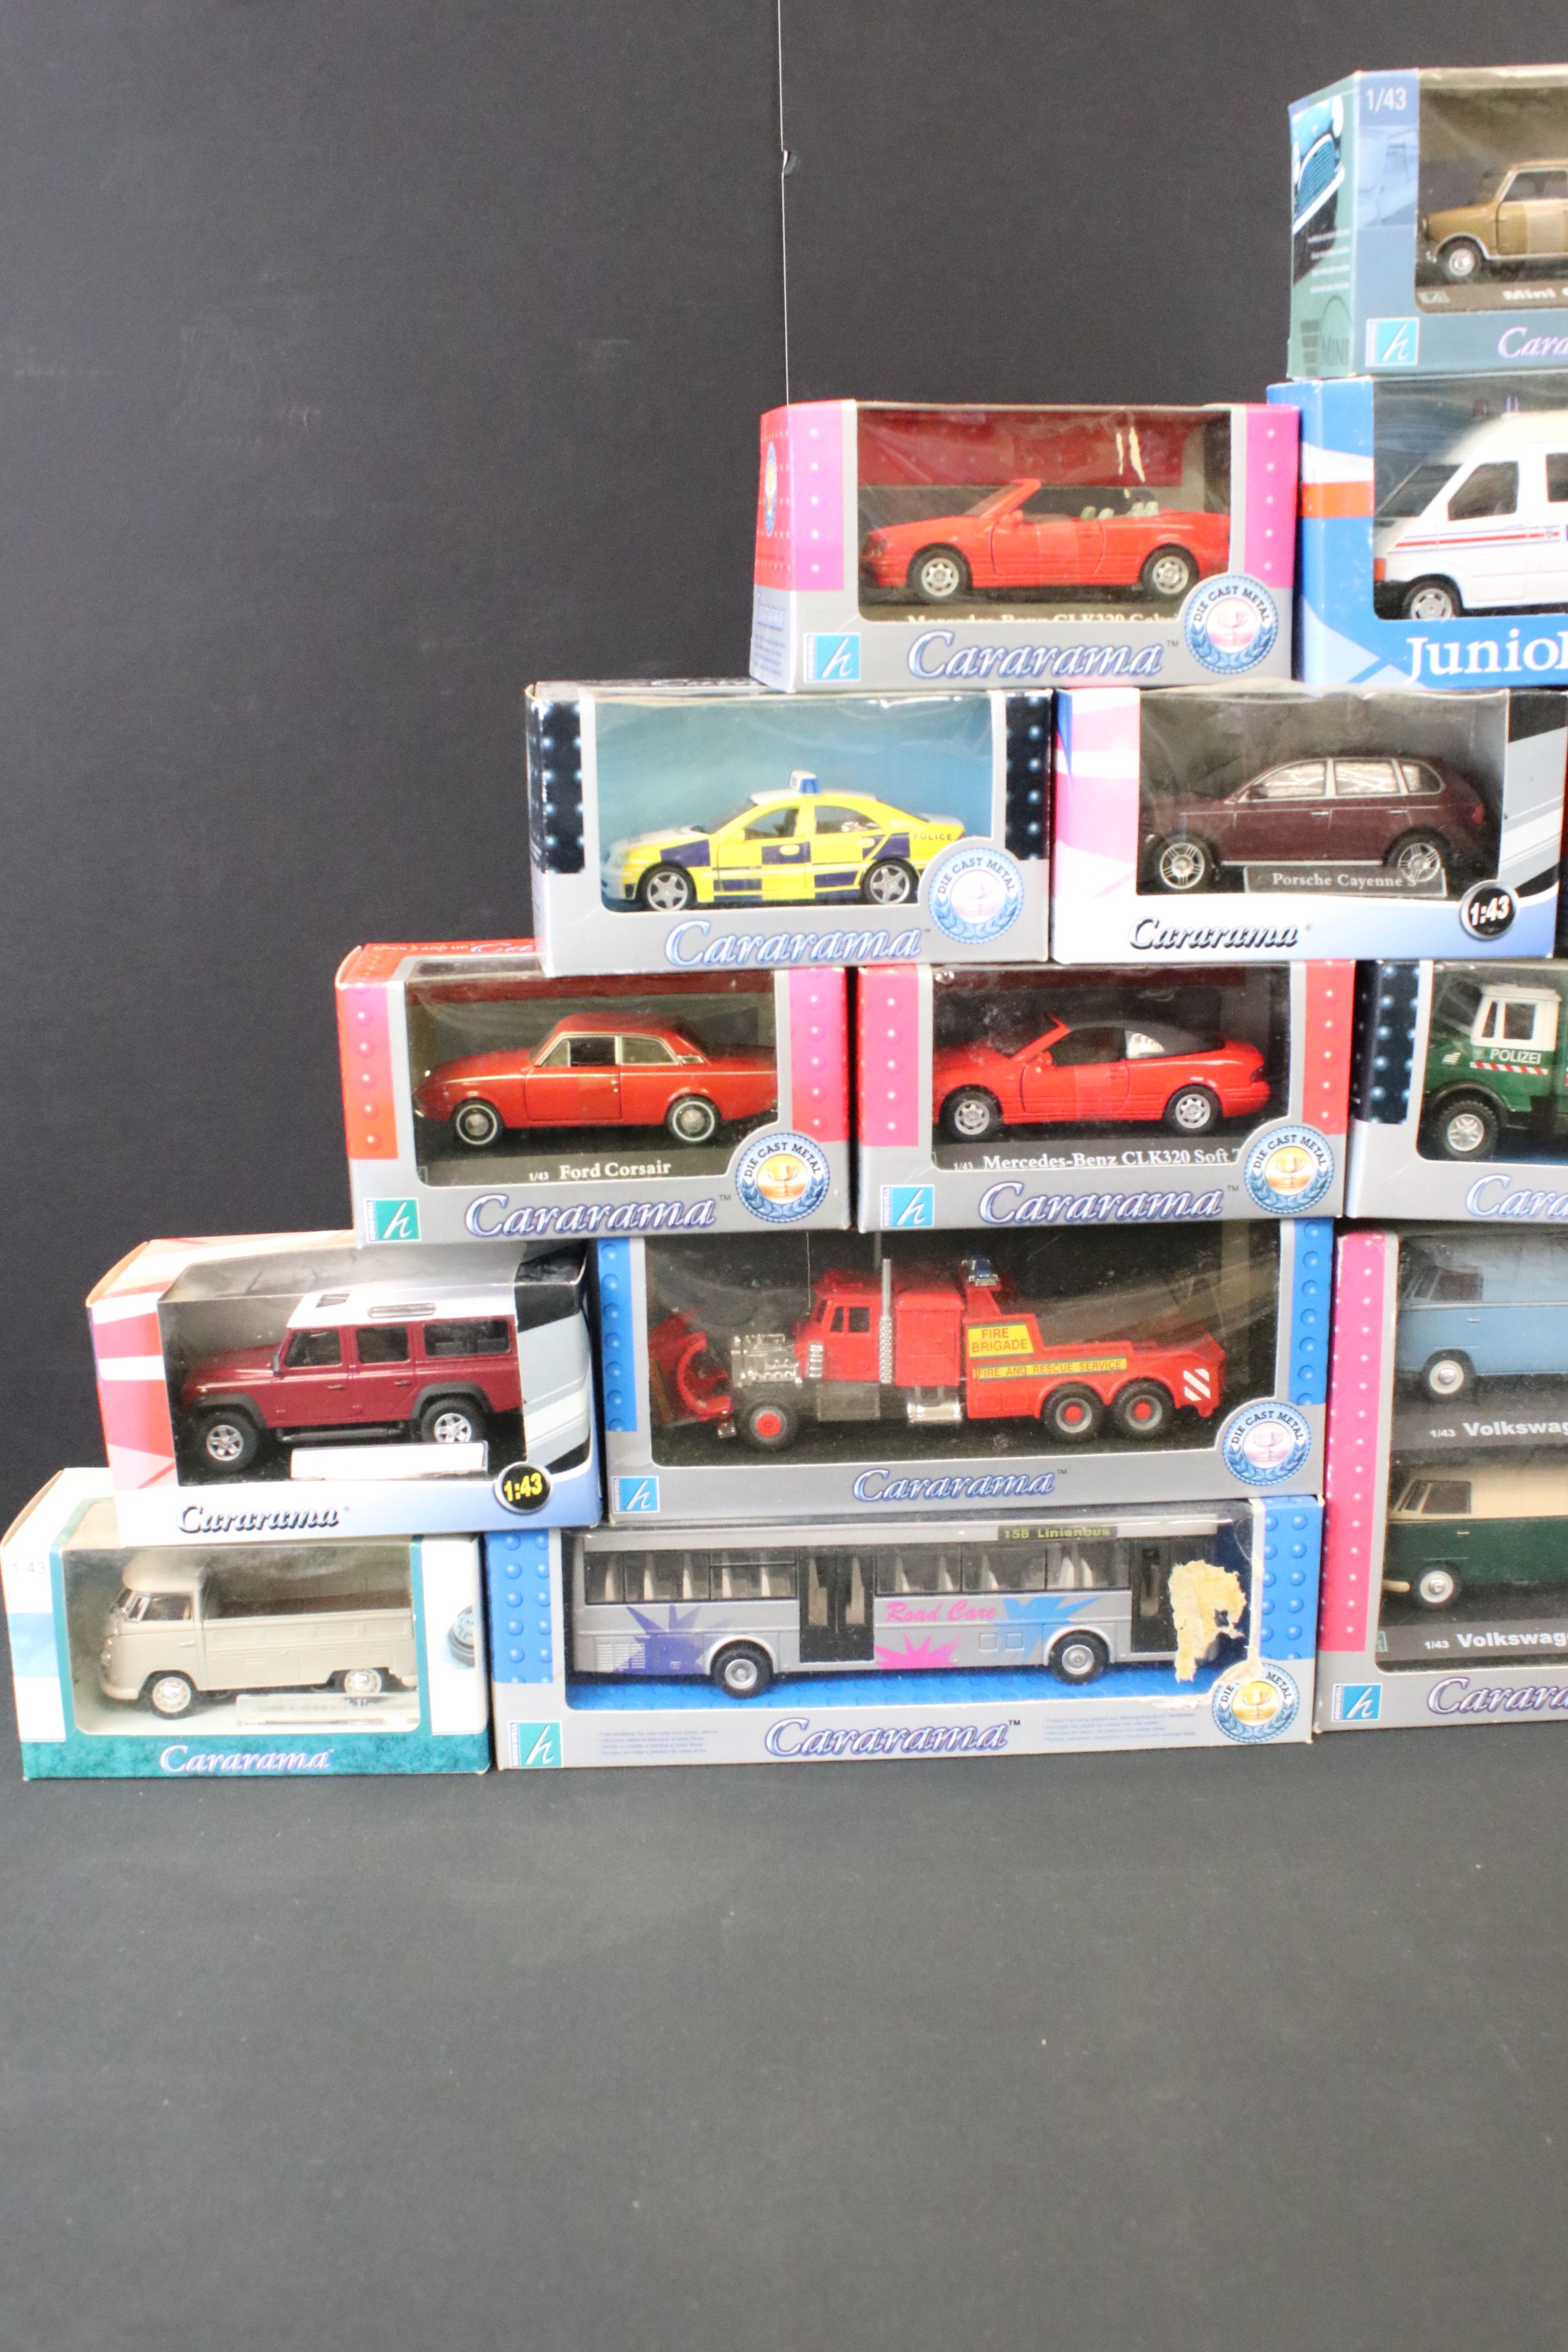 37 Boxed Cararama diecast models to include No. 252 1/43 Volkswagen Microbus multi-model set, No. - Image 6 of 8